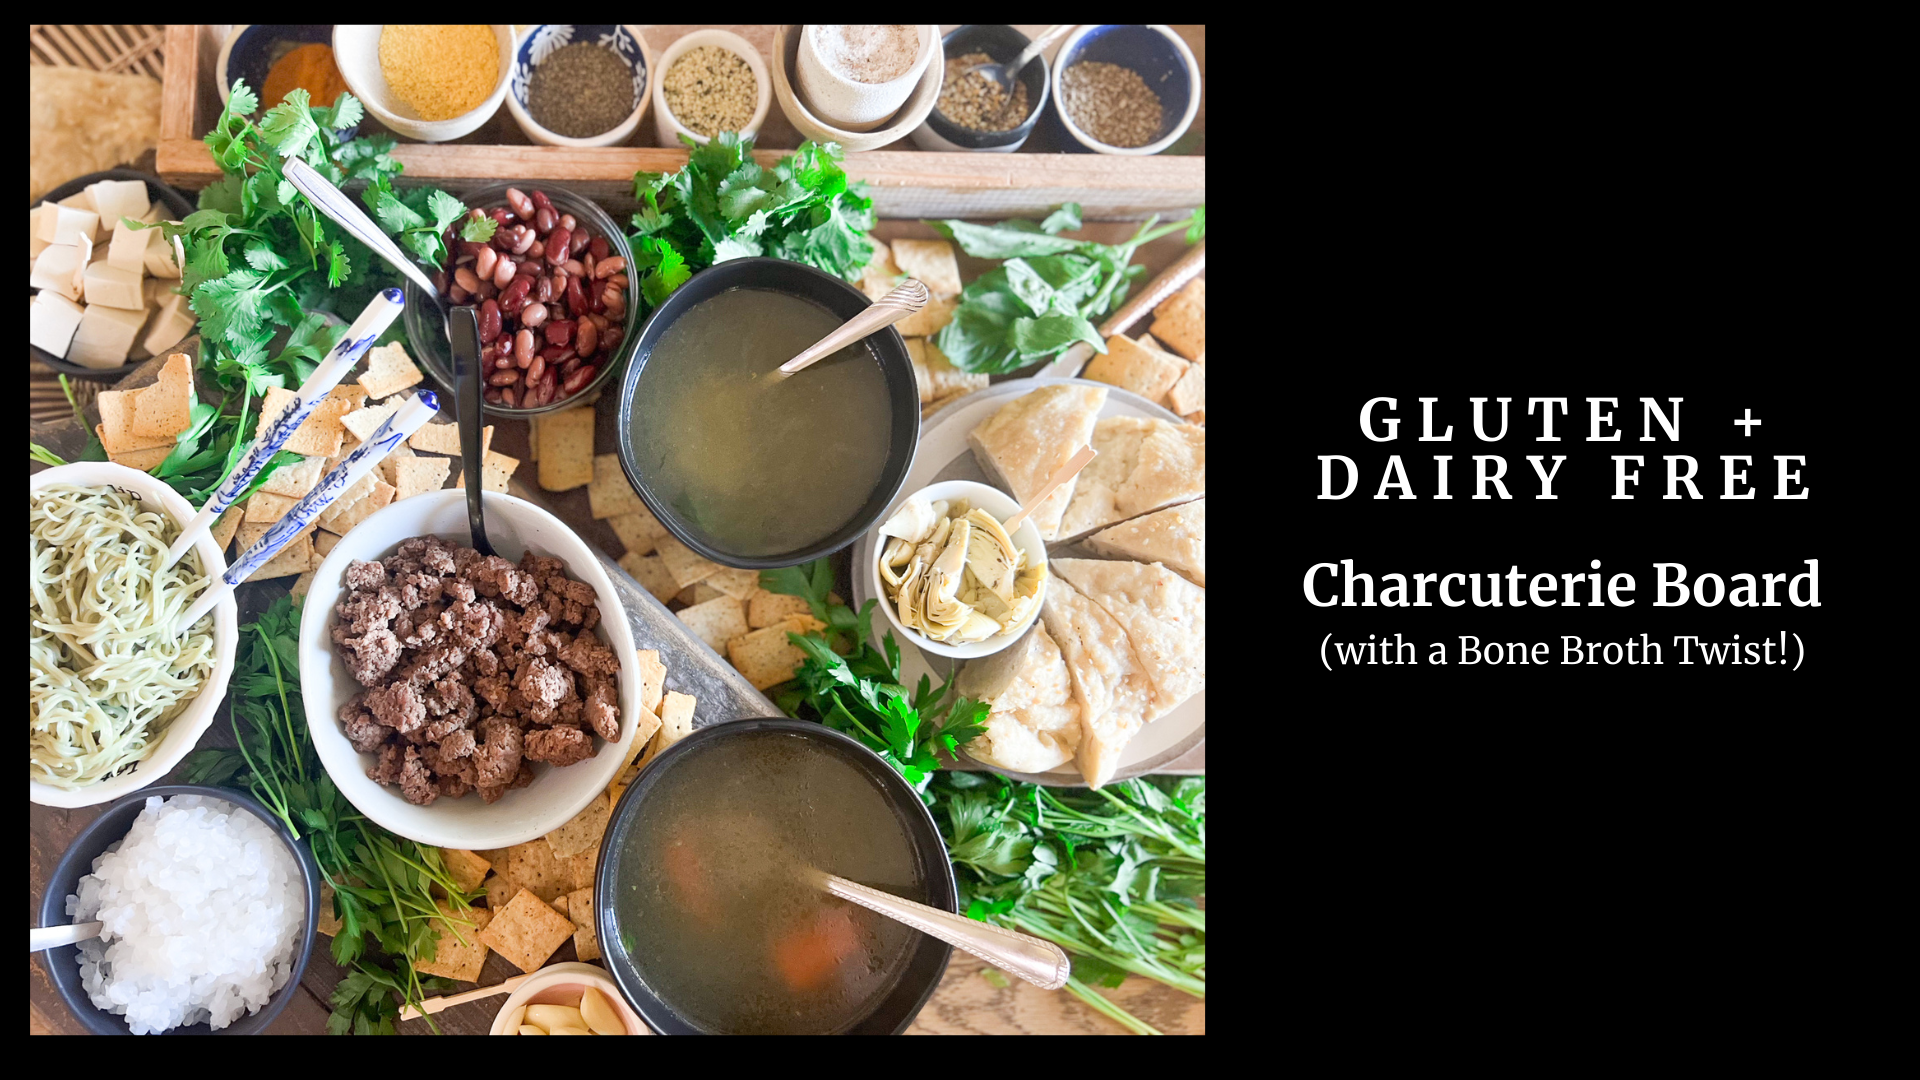 Gluten and Dairy Free Charcuterie Board (with a Bone Broth Twist!)